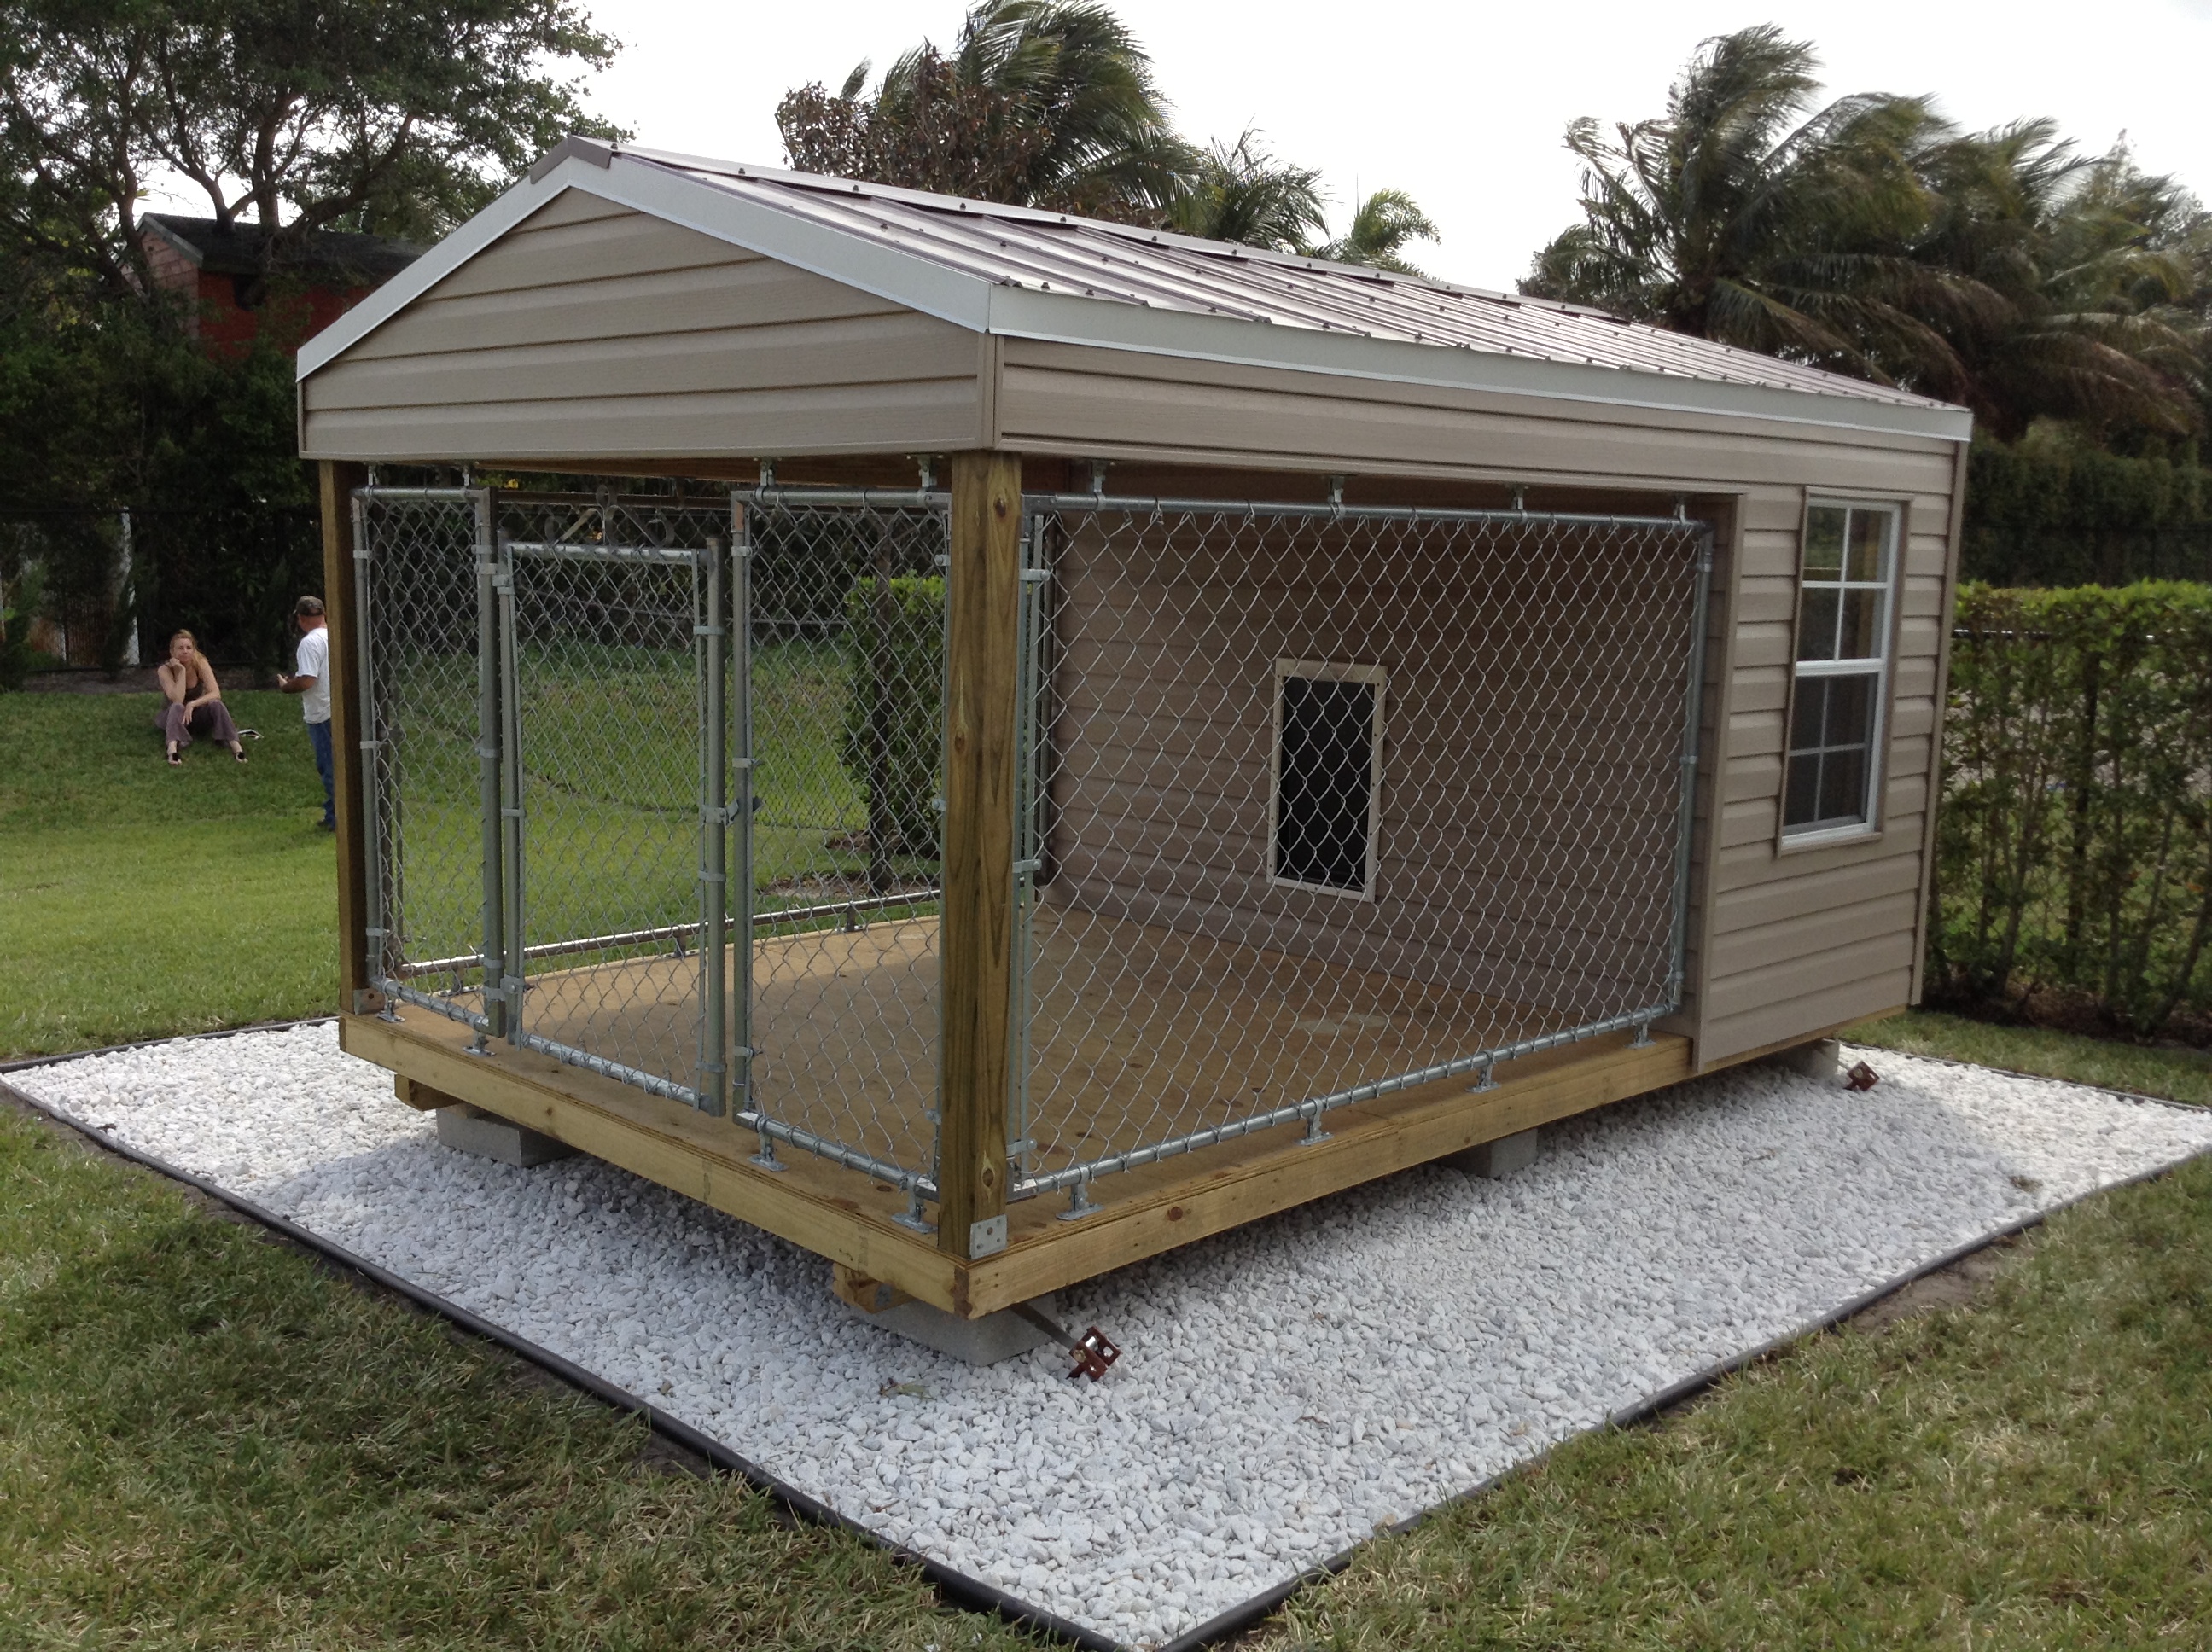 air conditioned and heated dog house